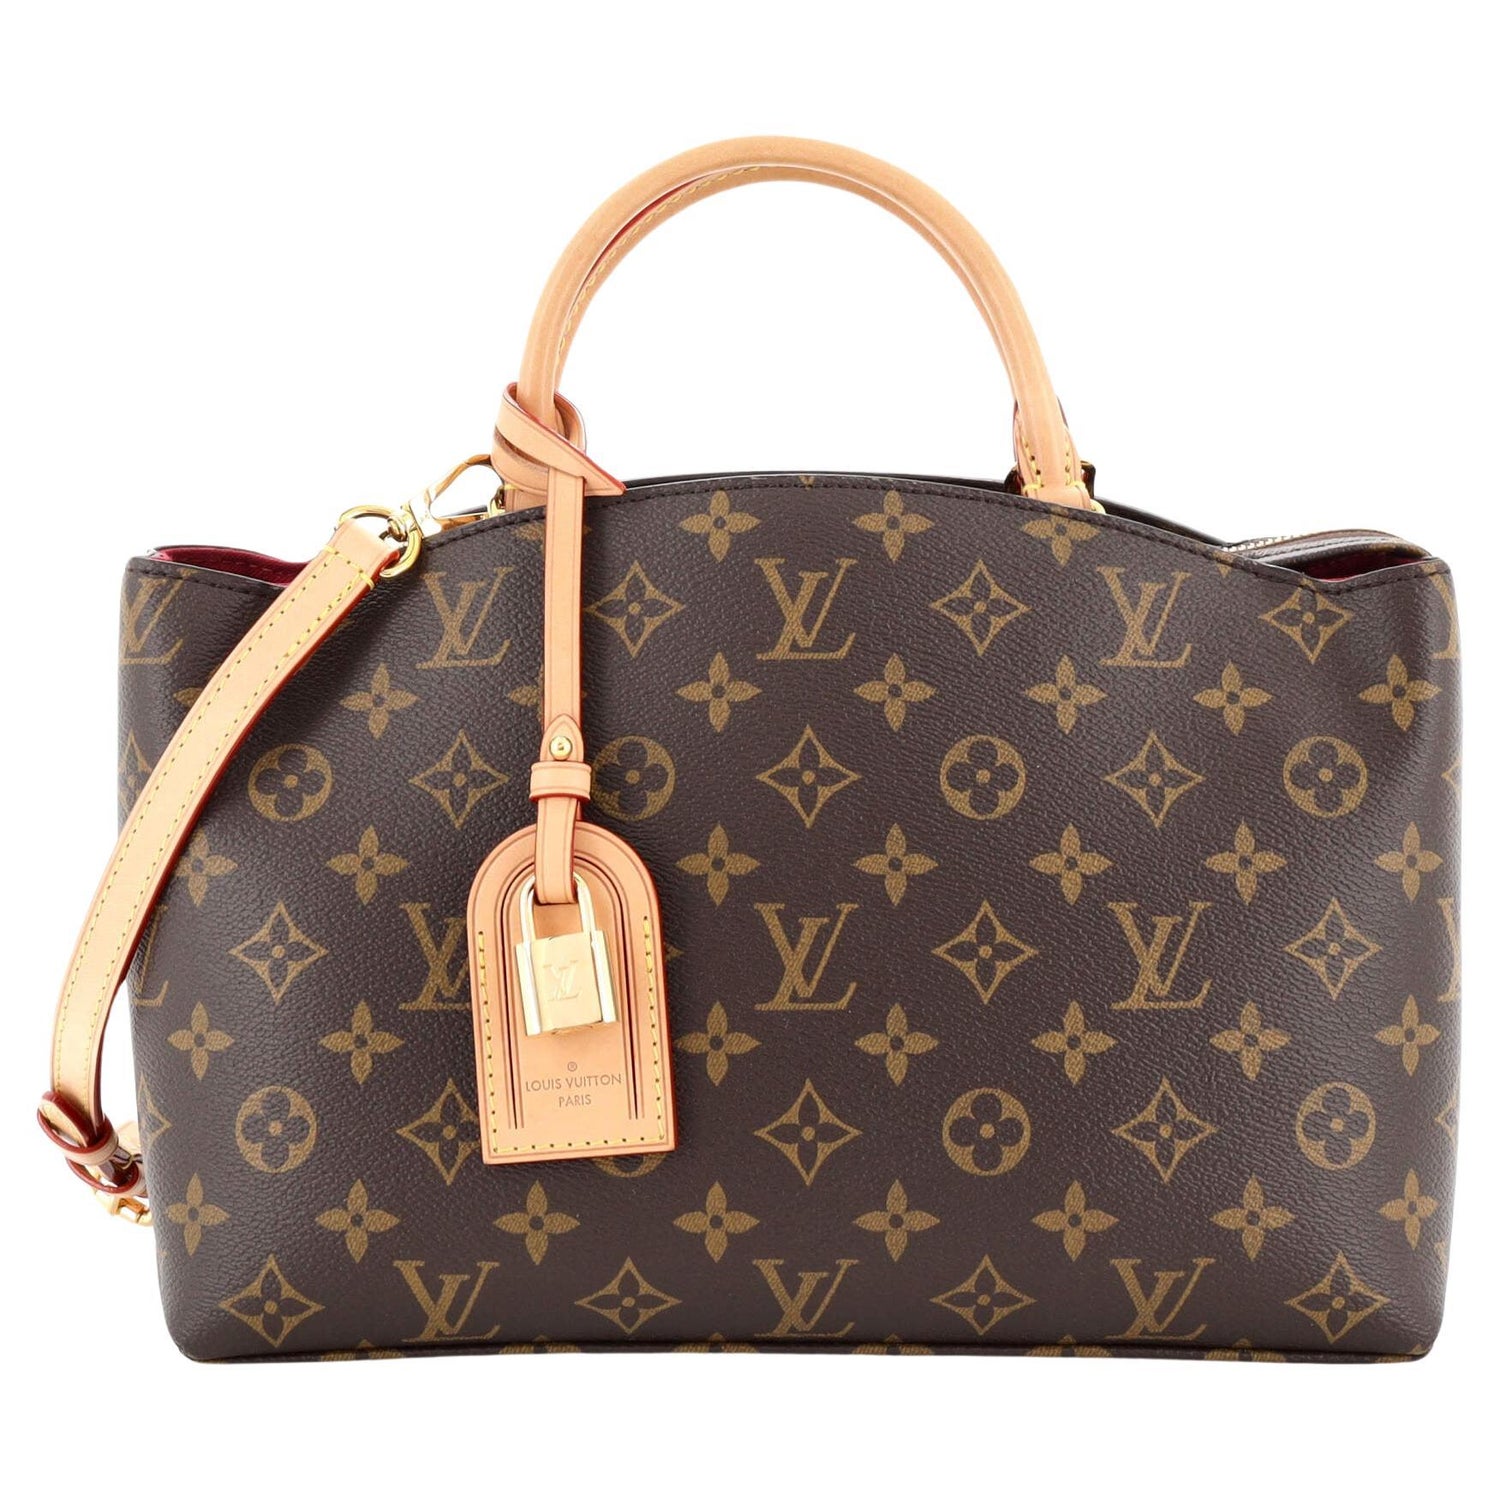 Louis Vuitton Neverfull Bags for sale in Lyon, France